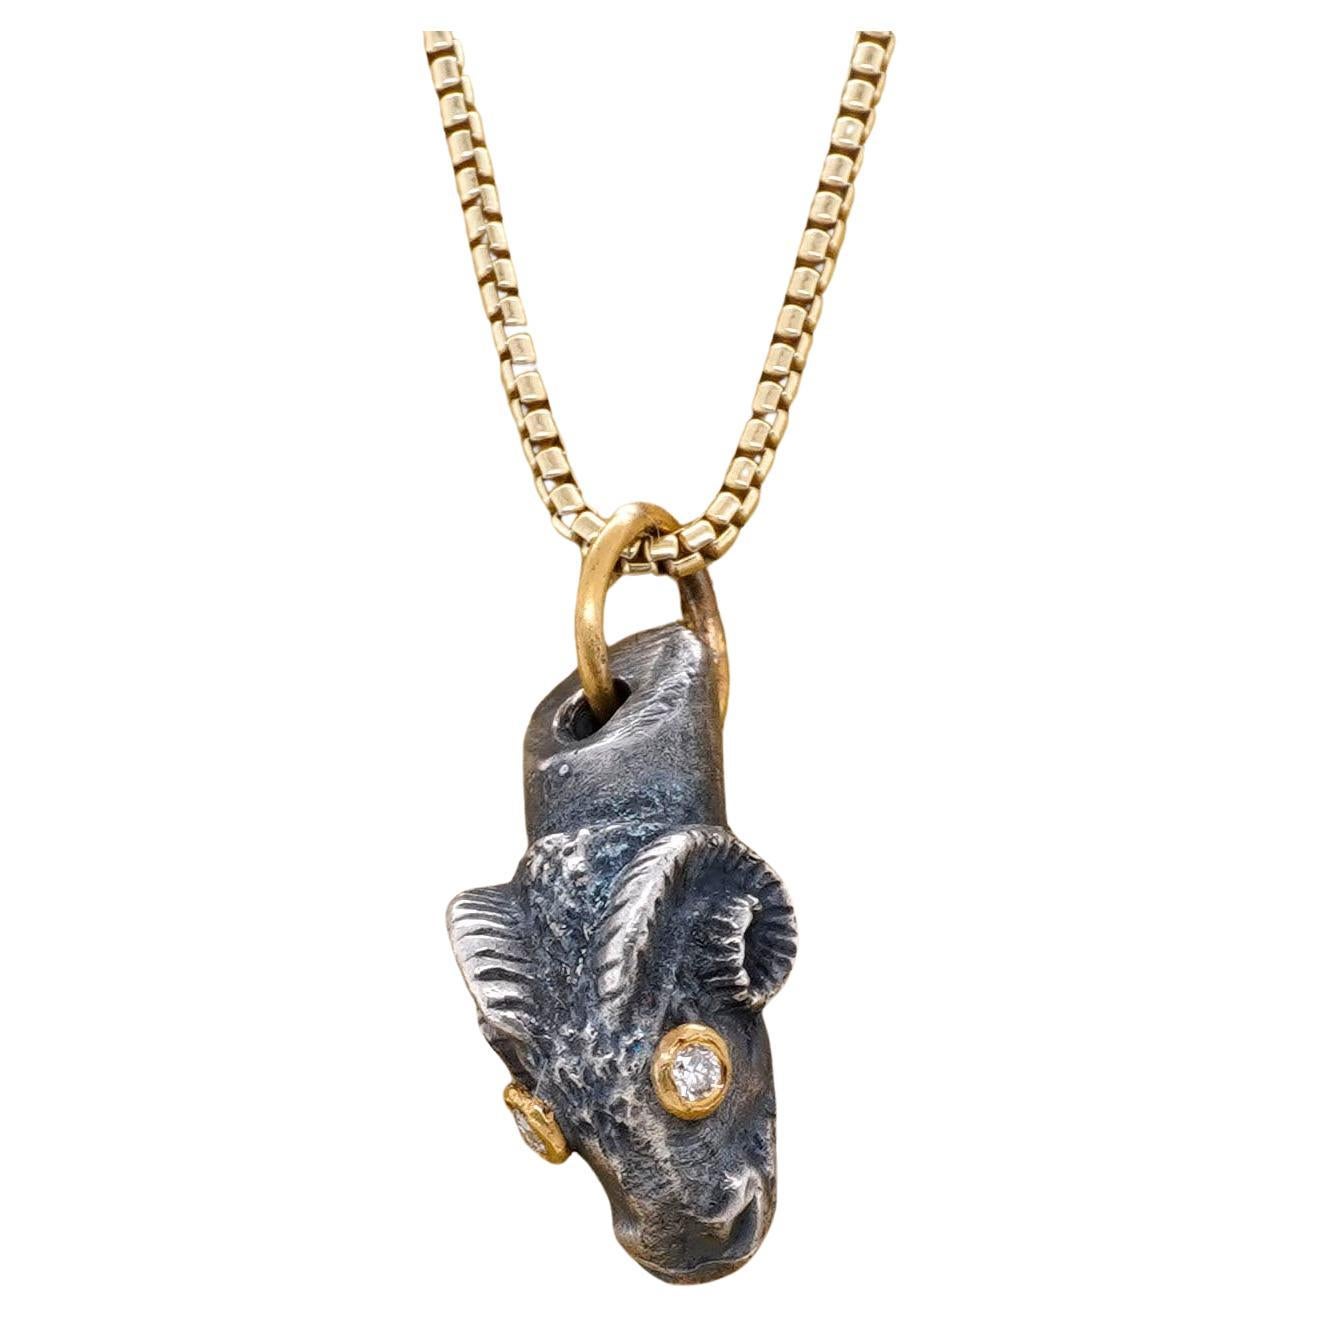 Ancient Ram's Head with Diamond Eyes, Charm Pendant Necklace, 24kt Gold and SS For Sale